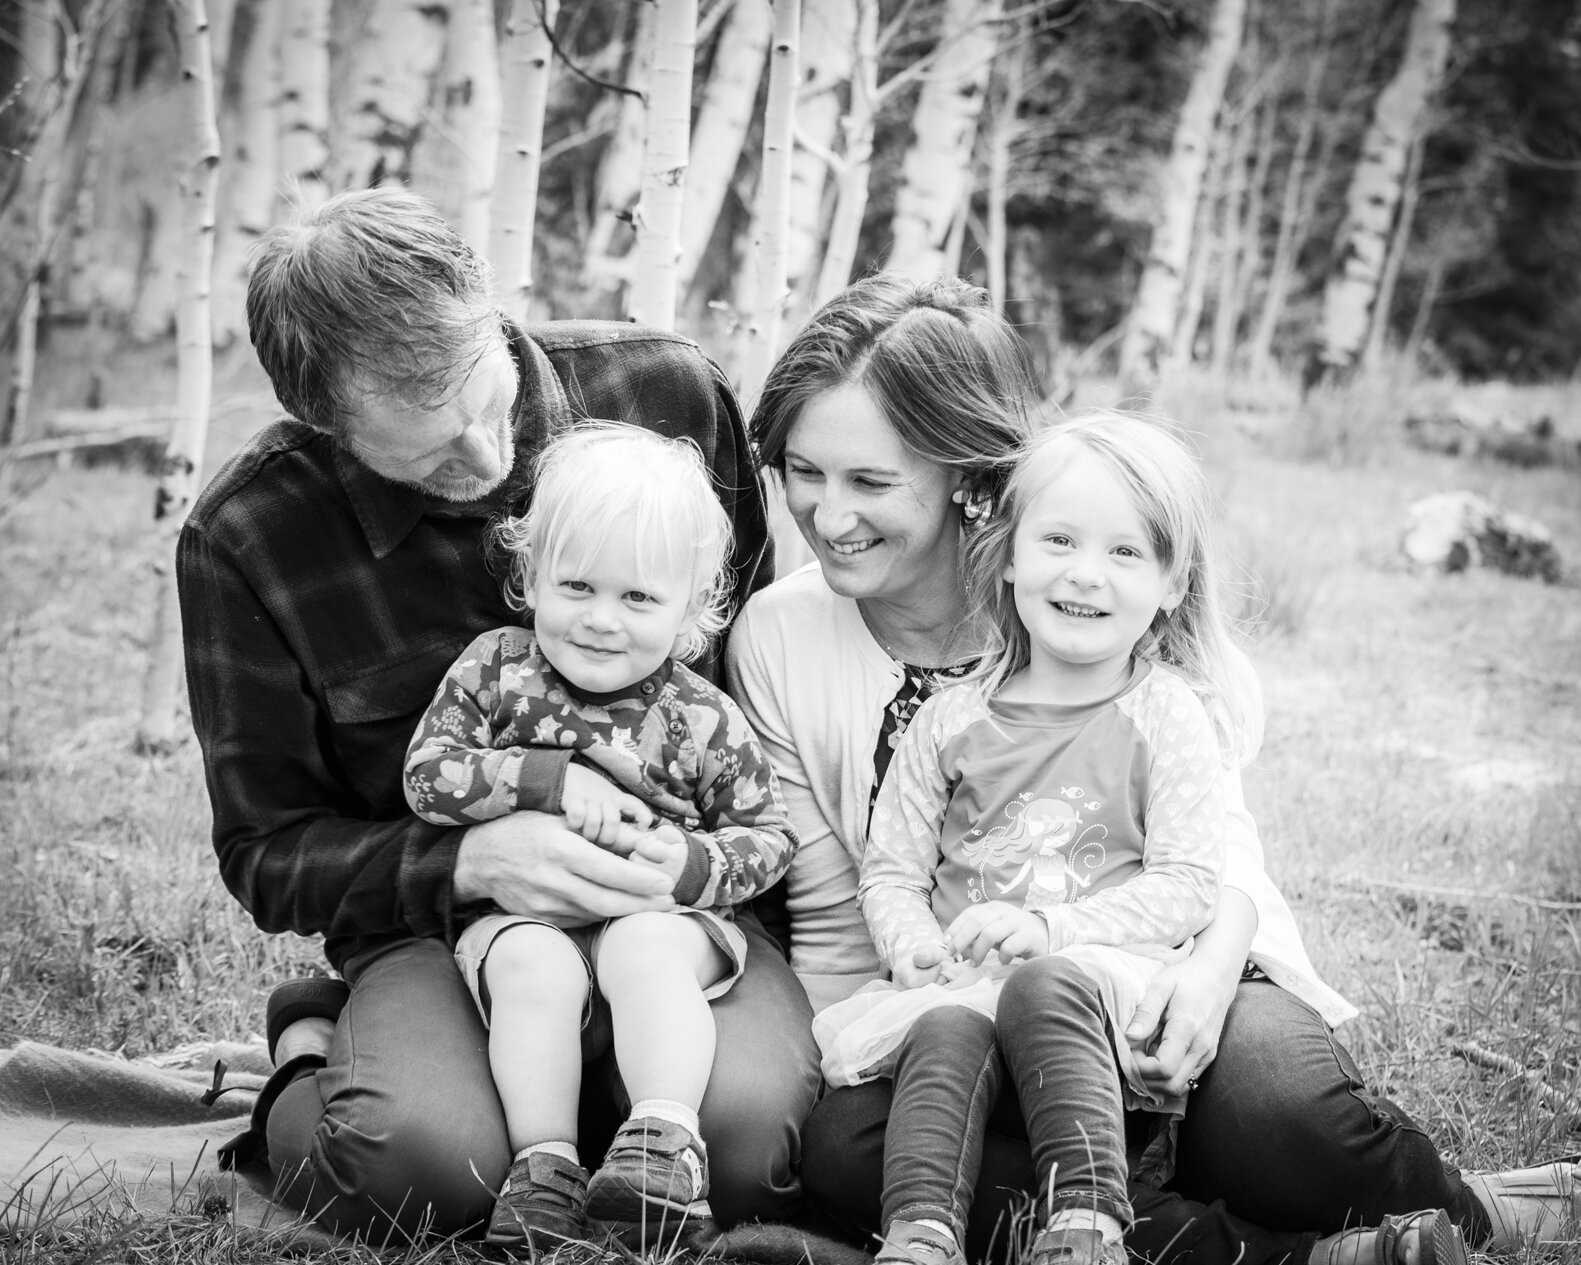 Colorado-Portrait-Family-Photography-Crested-Butte-Wedding-Photographer-6-4.jpg